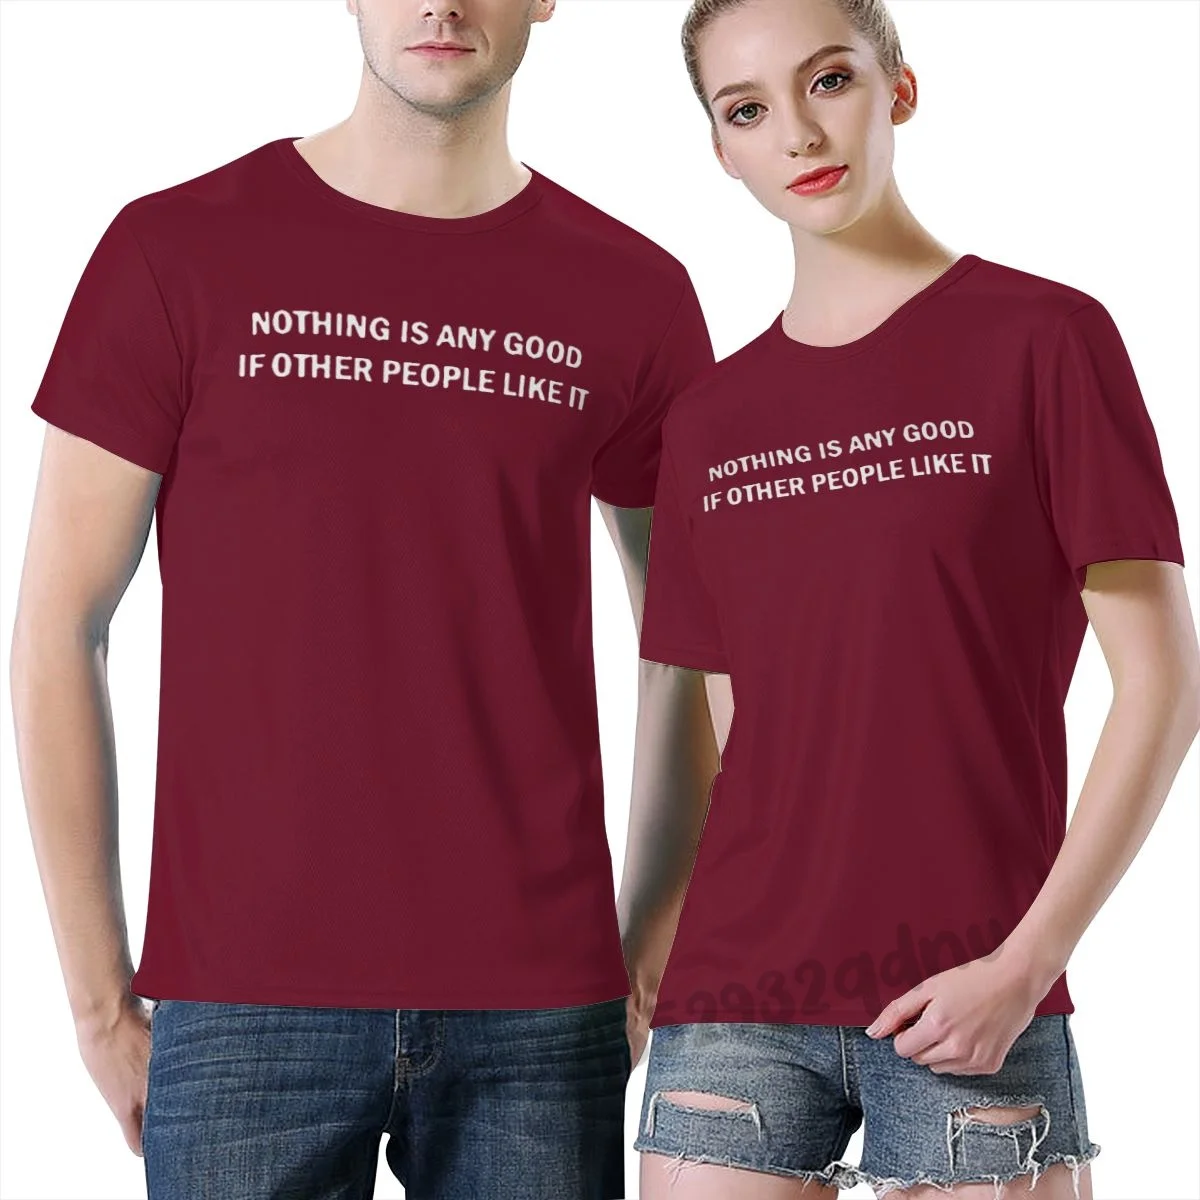 

NOTHING IS ANY GOOD IF OTHER PEOPLE LIKE IT Unisex T Shirt Burgundy O-Neck Athletic T-Shirts S